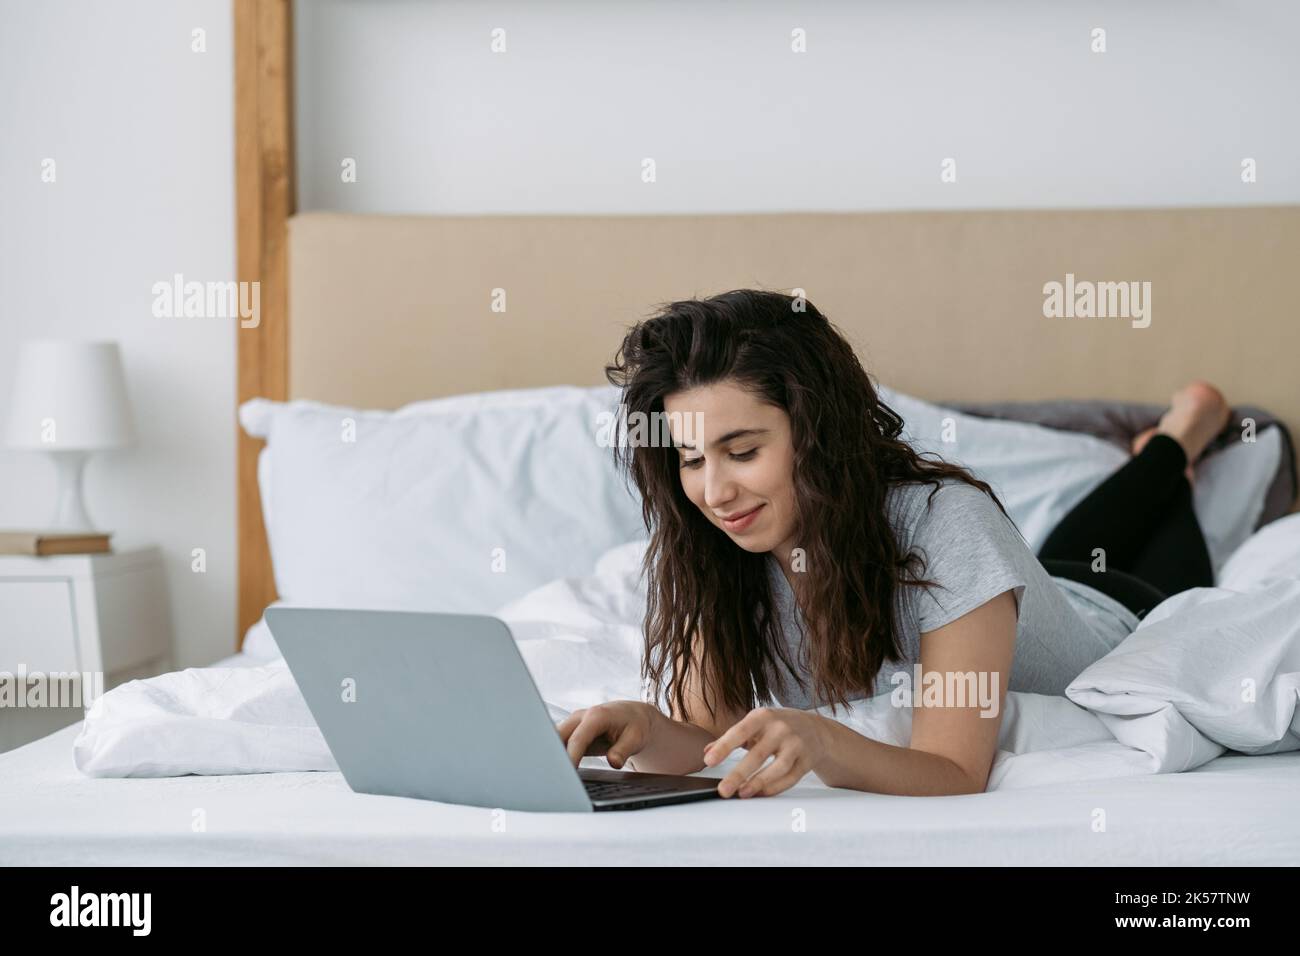 Morning chat. Virtual communication. Social media. Digital weekend. Relaxed woman enjoying speaking online using laptop network lying on bed in light Stock Photo